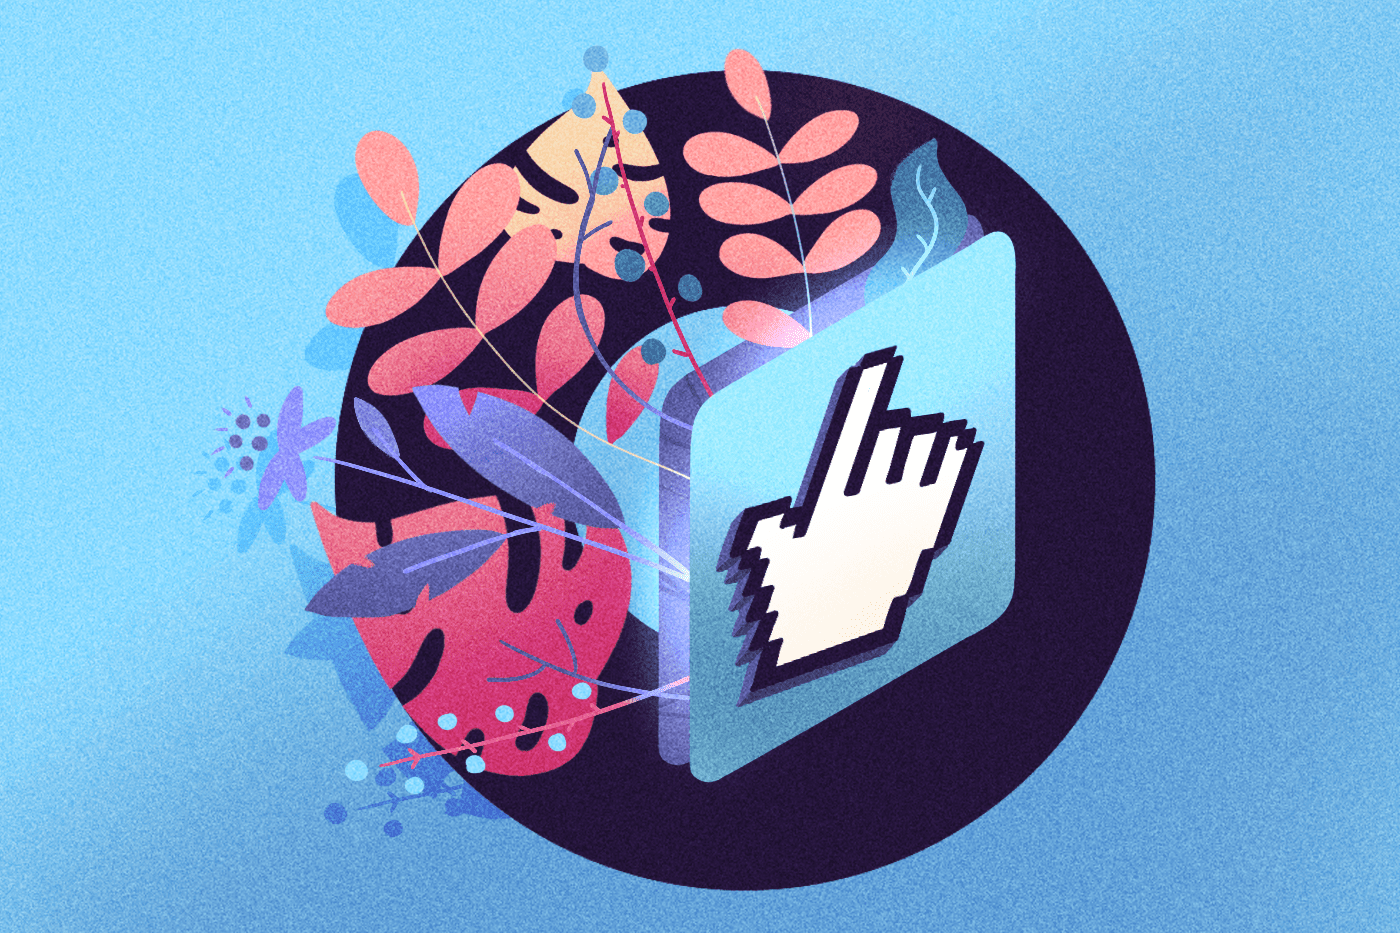 Illustration of a digital hand icon with plants growing from the icon